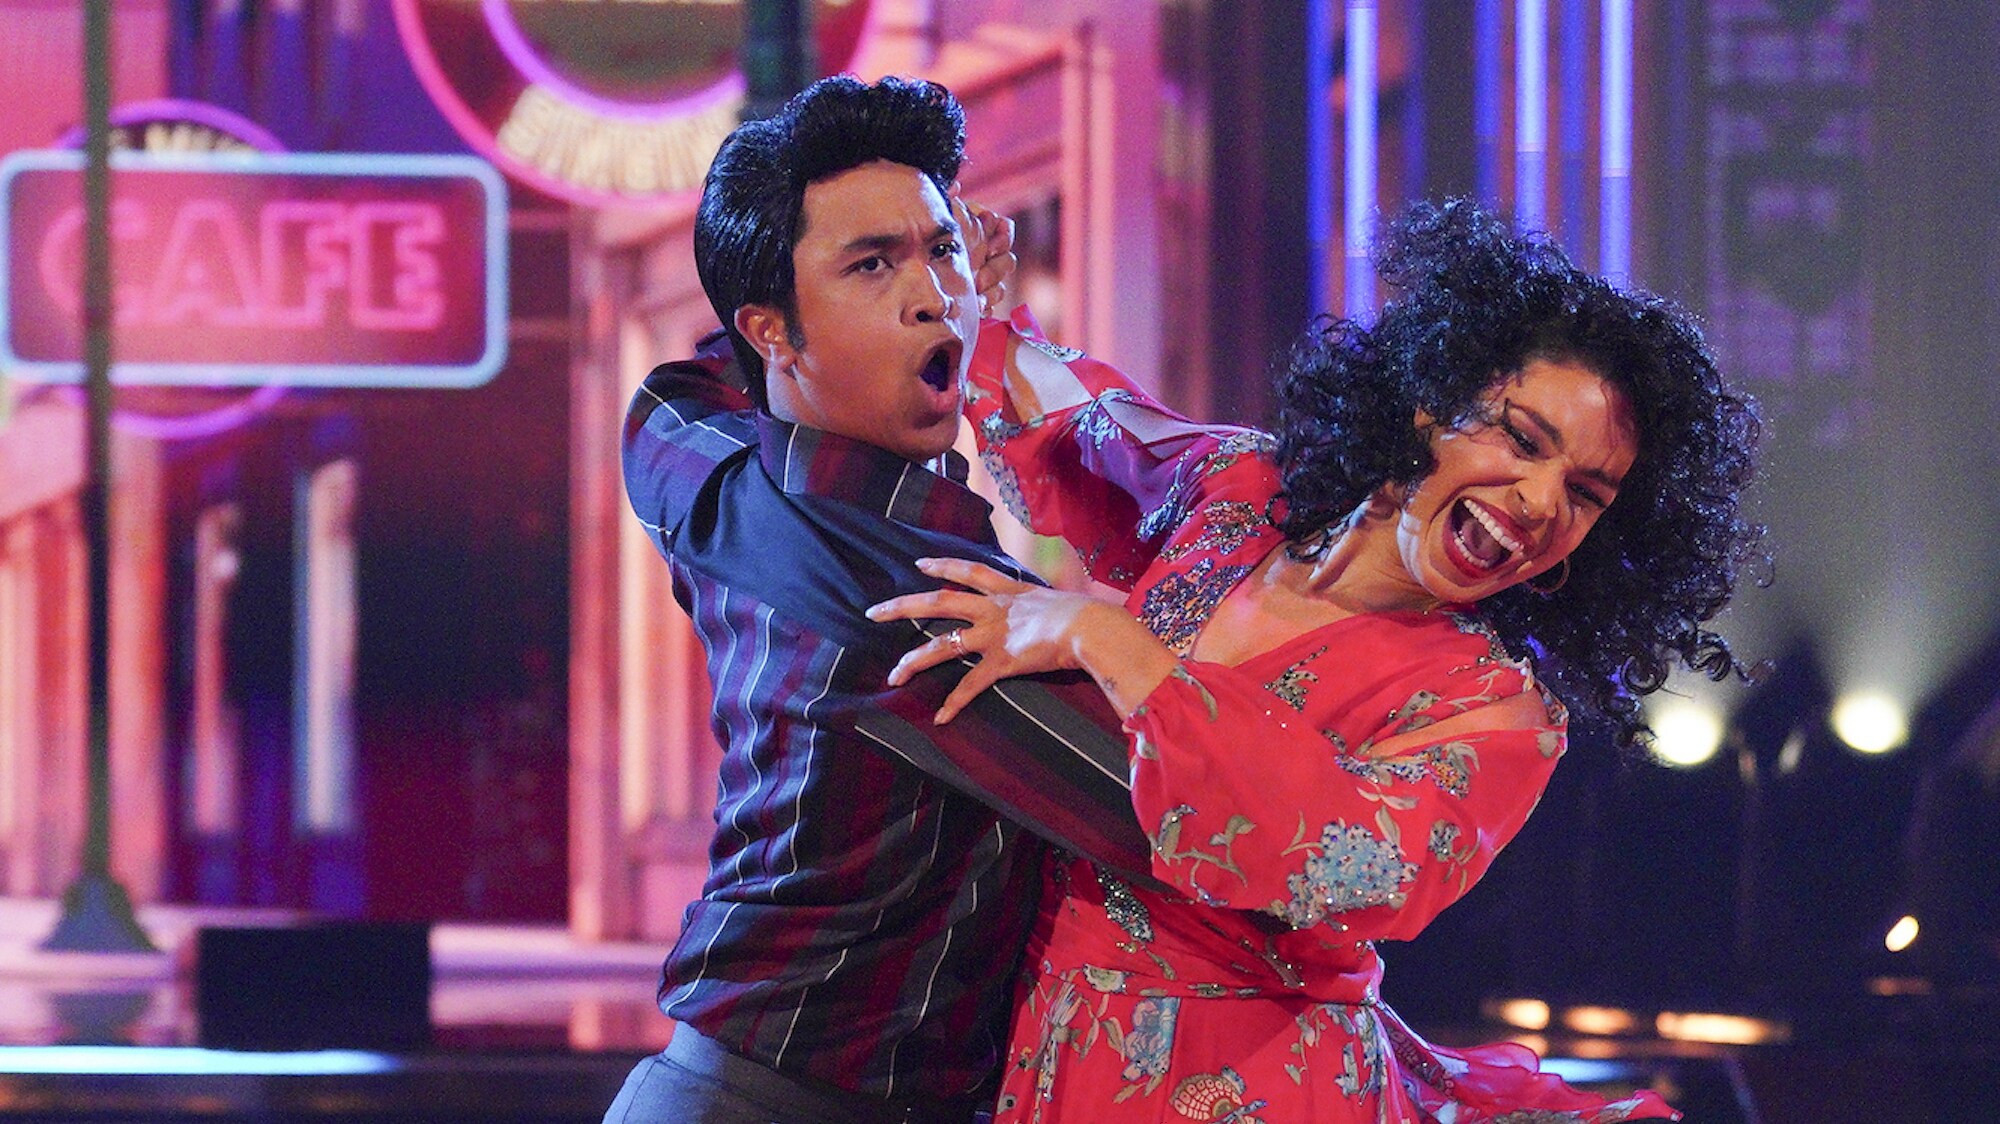 DANCING WITH THE STARS - “Elvis Night” –  The 15 remaining couples “Can’t Help Falling in Love” with Elvis this week as they take on all-new dance styles to music by The King of Rock ‘n’ Roll. Week two of the mirorrball competition will stream live MONDAY, SEPT. 26 (8:00pm ET / 5:00pm PT), on Disney+. (ABC/Christopher Willard) BRANDON ARMSTRONG, JORDIN SPARKS